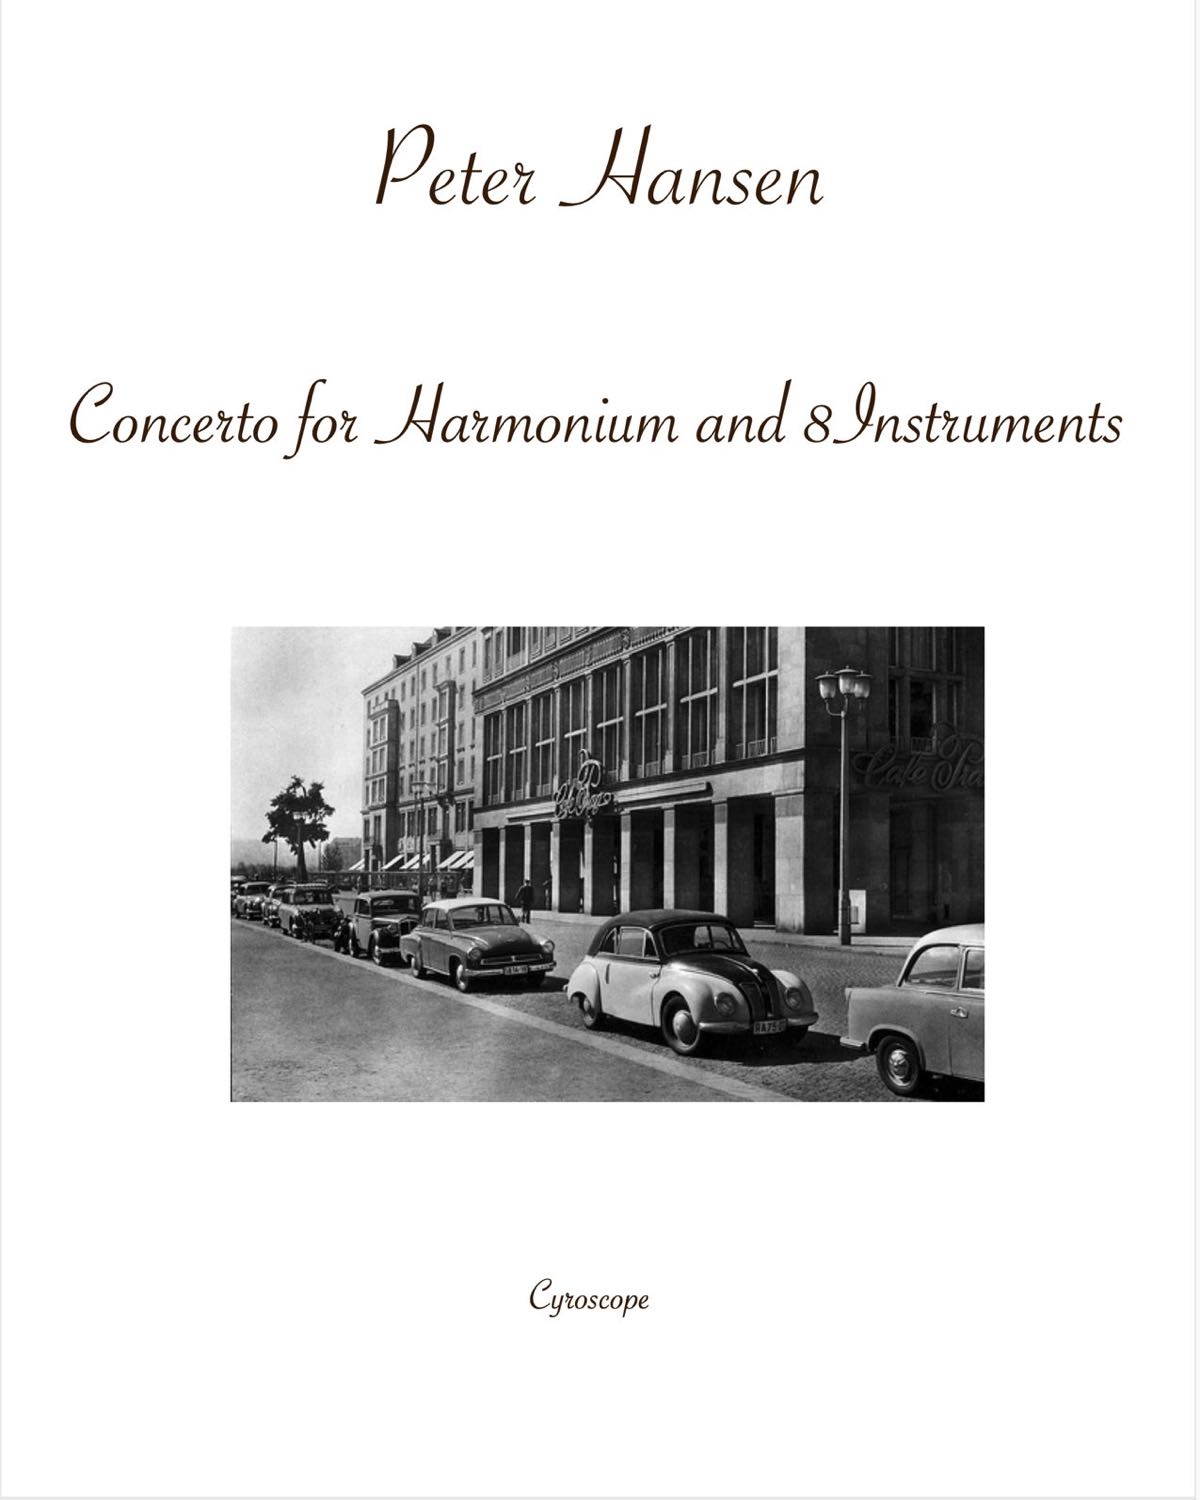 Concerto for Harmonium and 9 Instruments